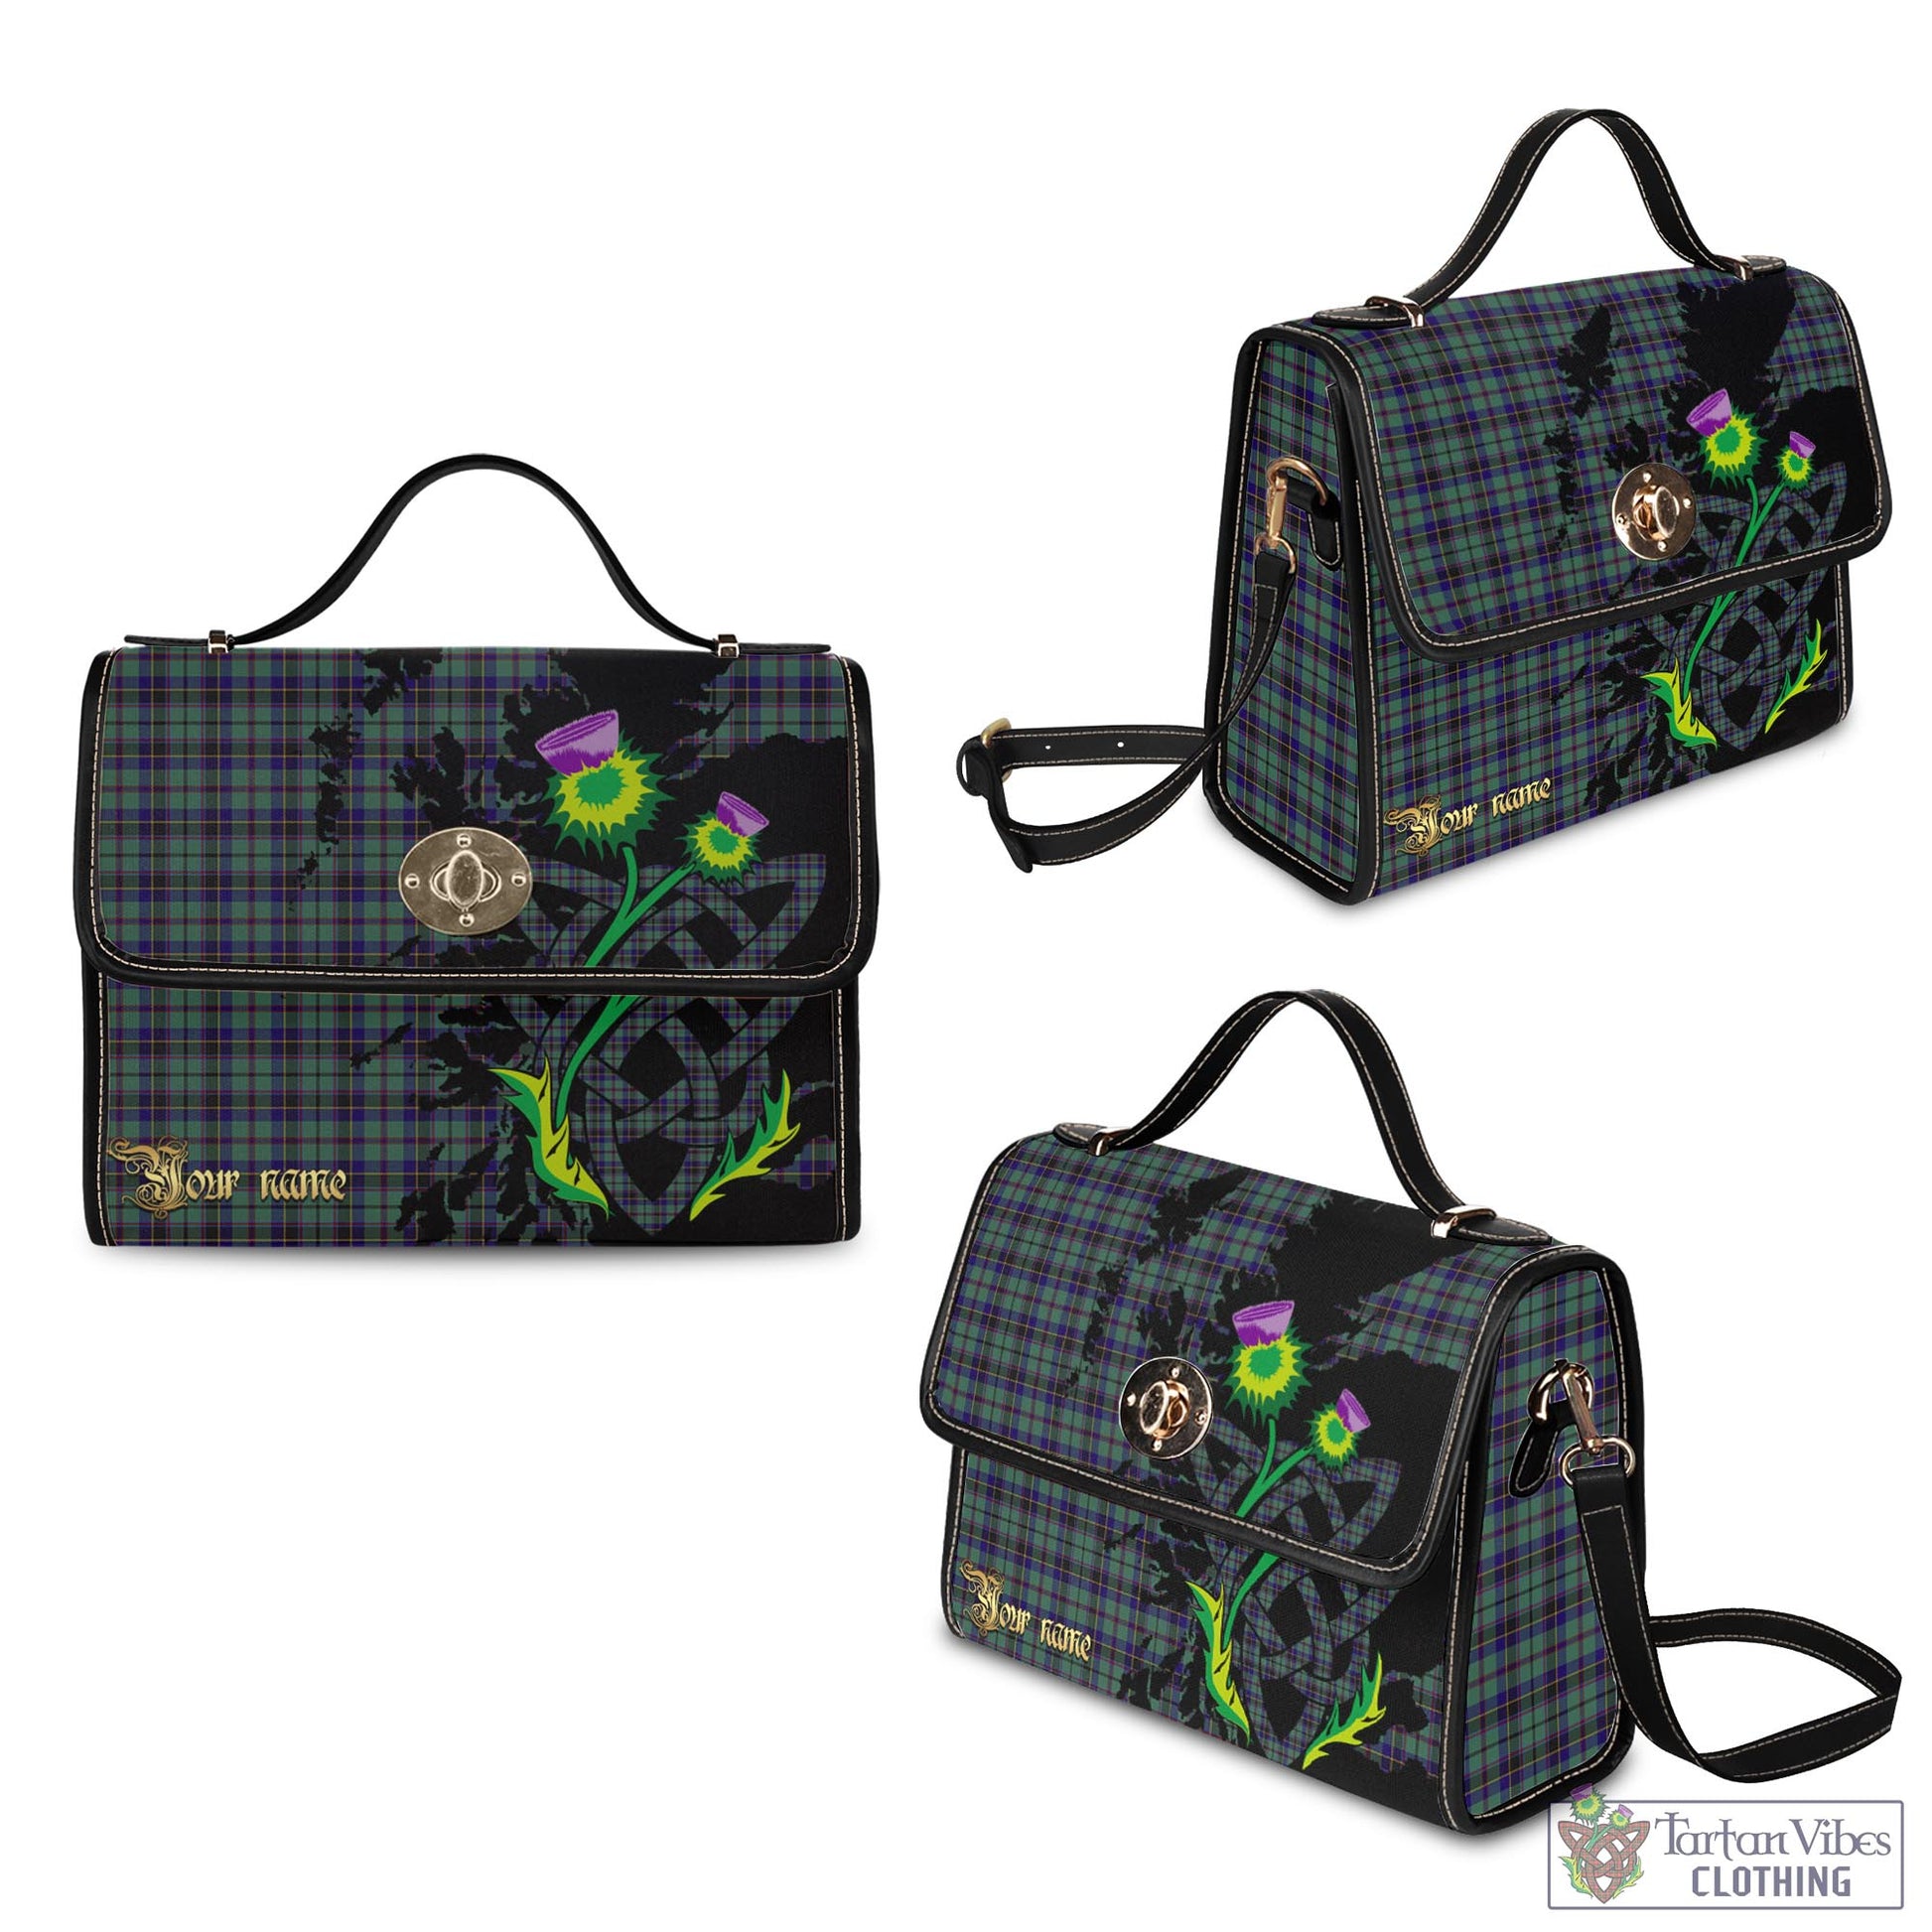 Tartan Vibes Clothing Stephenson Tartan Waterproof Canvas Bag with Scotland Map and Thistle Celtic Accents